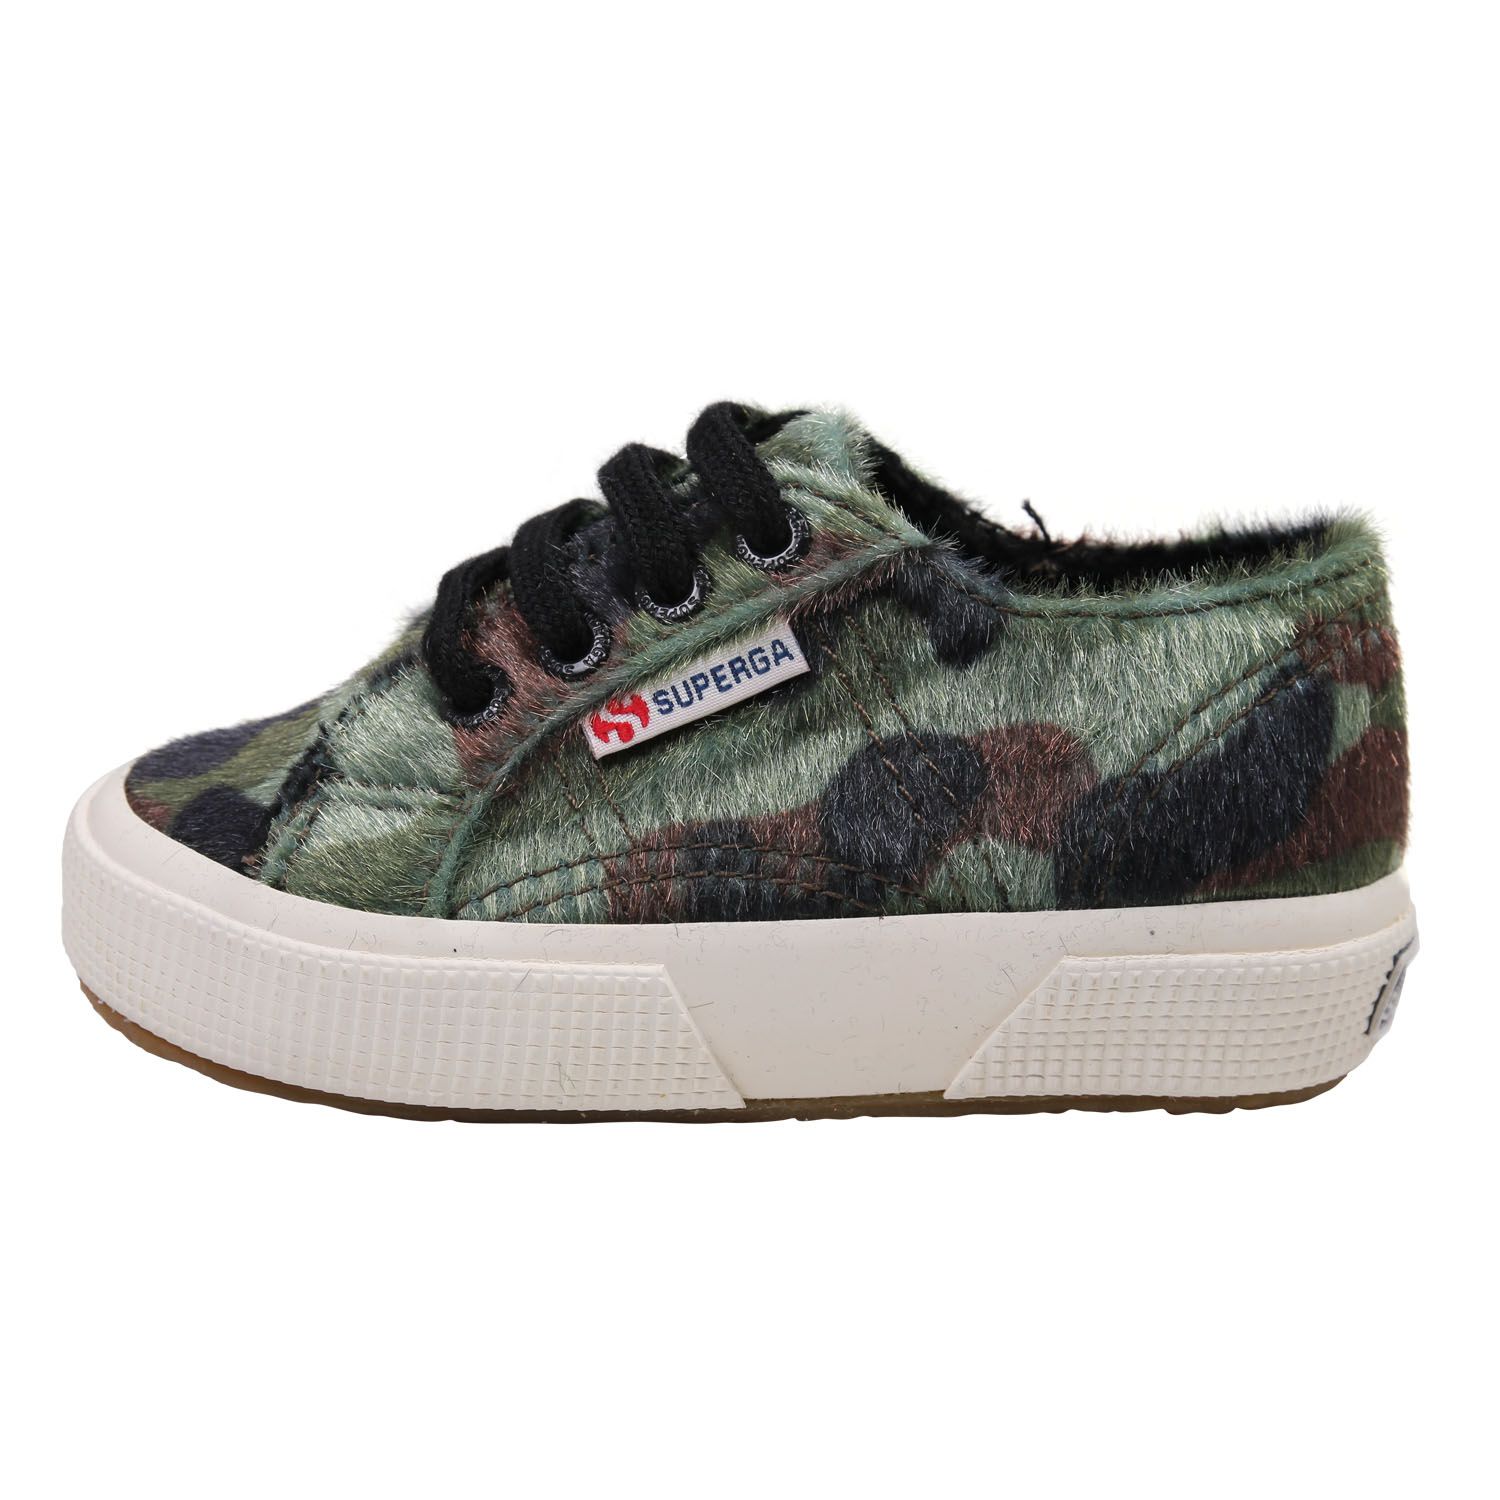 Superga green shoe - Shoe details with upper in camouflage print synthetic leather, microfleece lining and vulcanized natural rubber sole